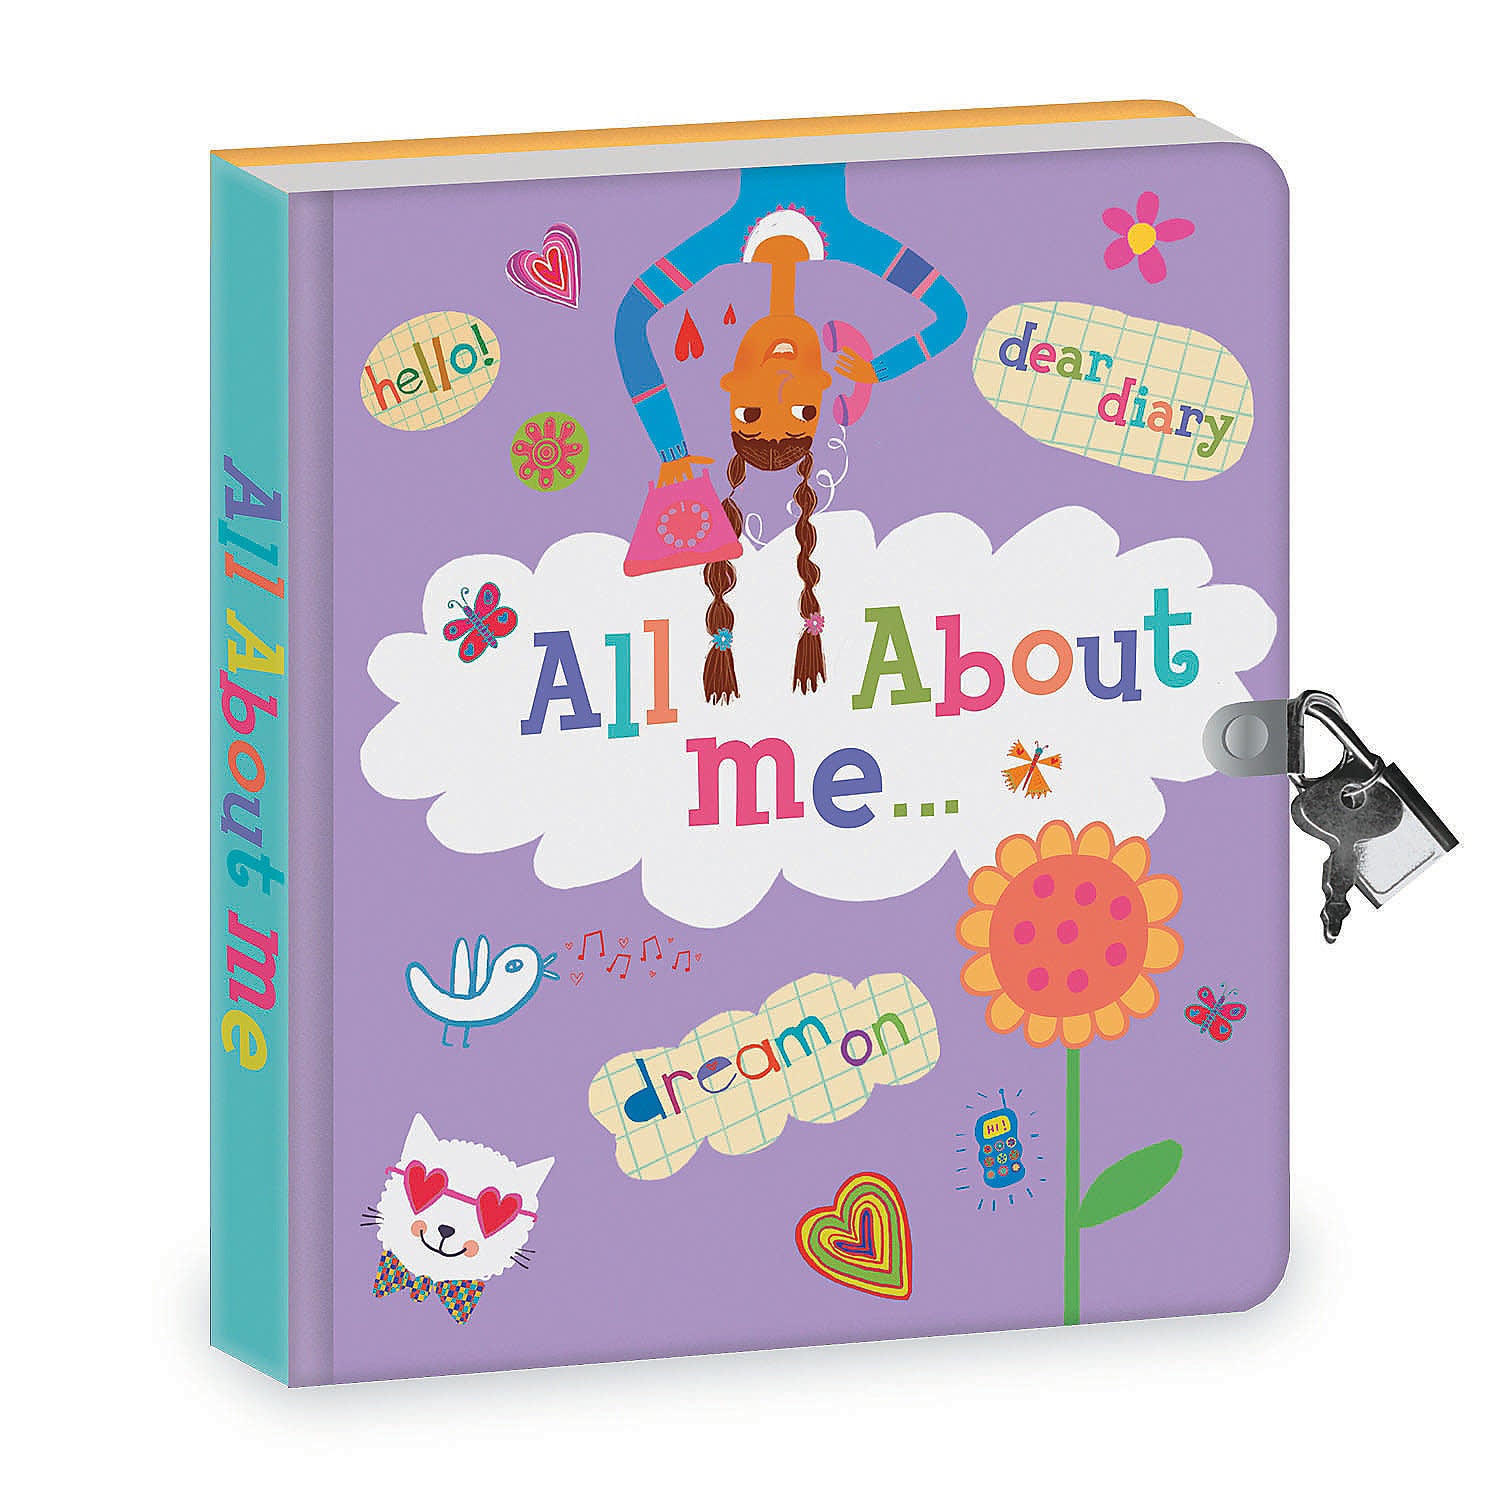 All About Me Diary